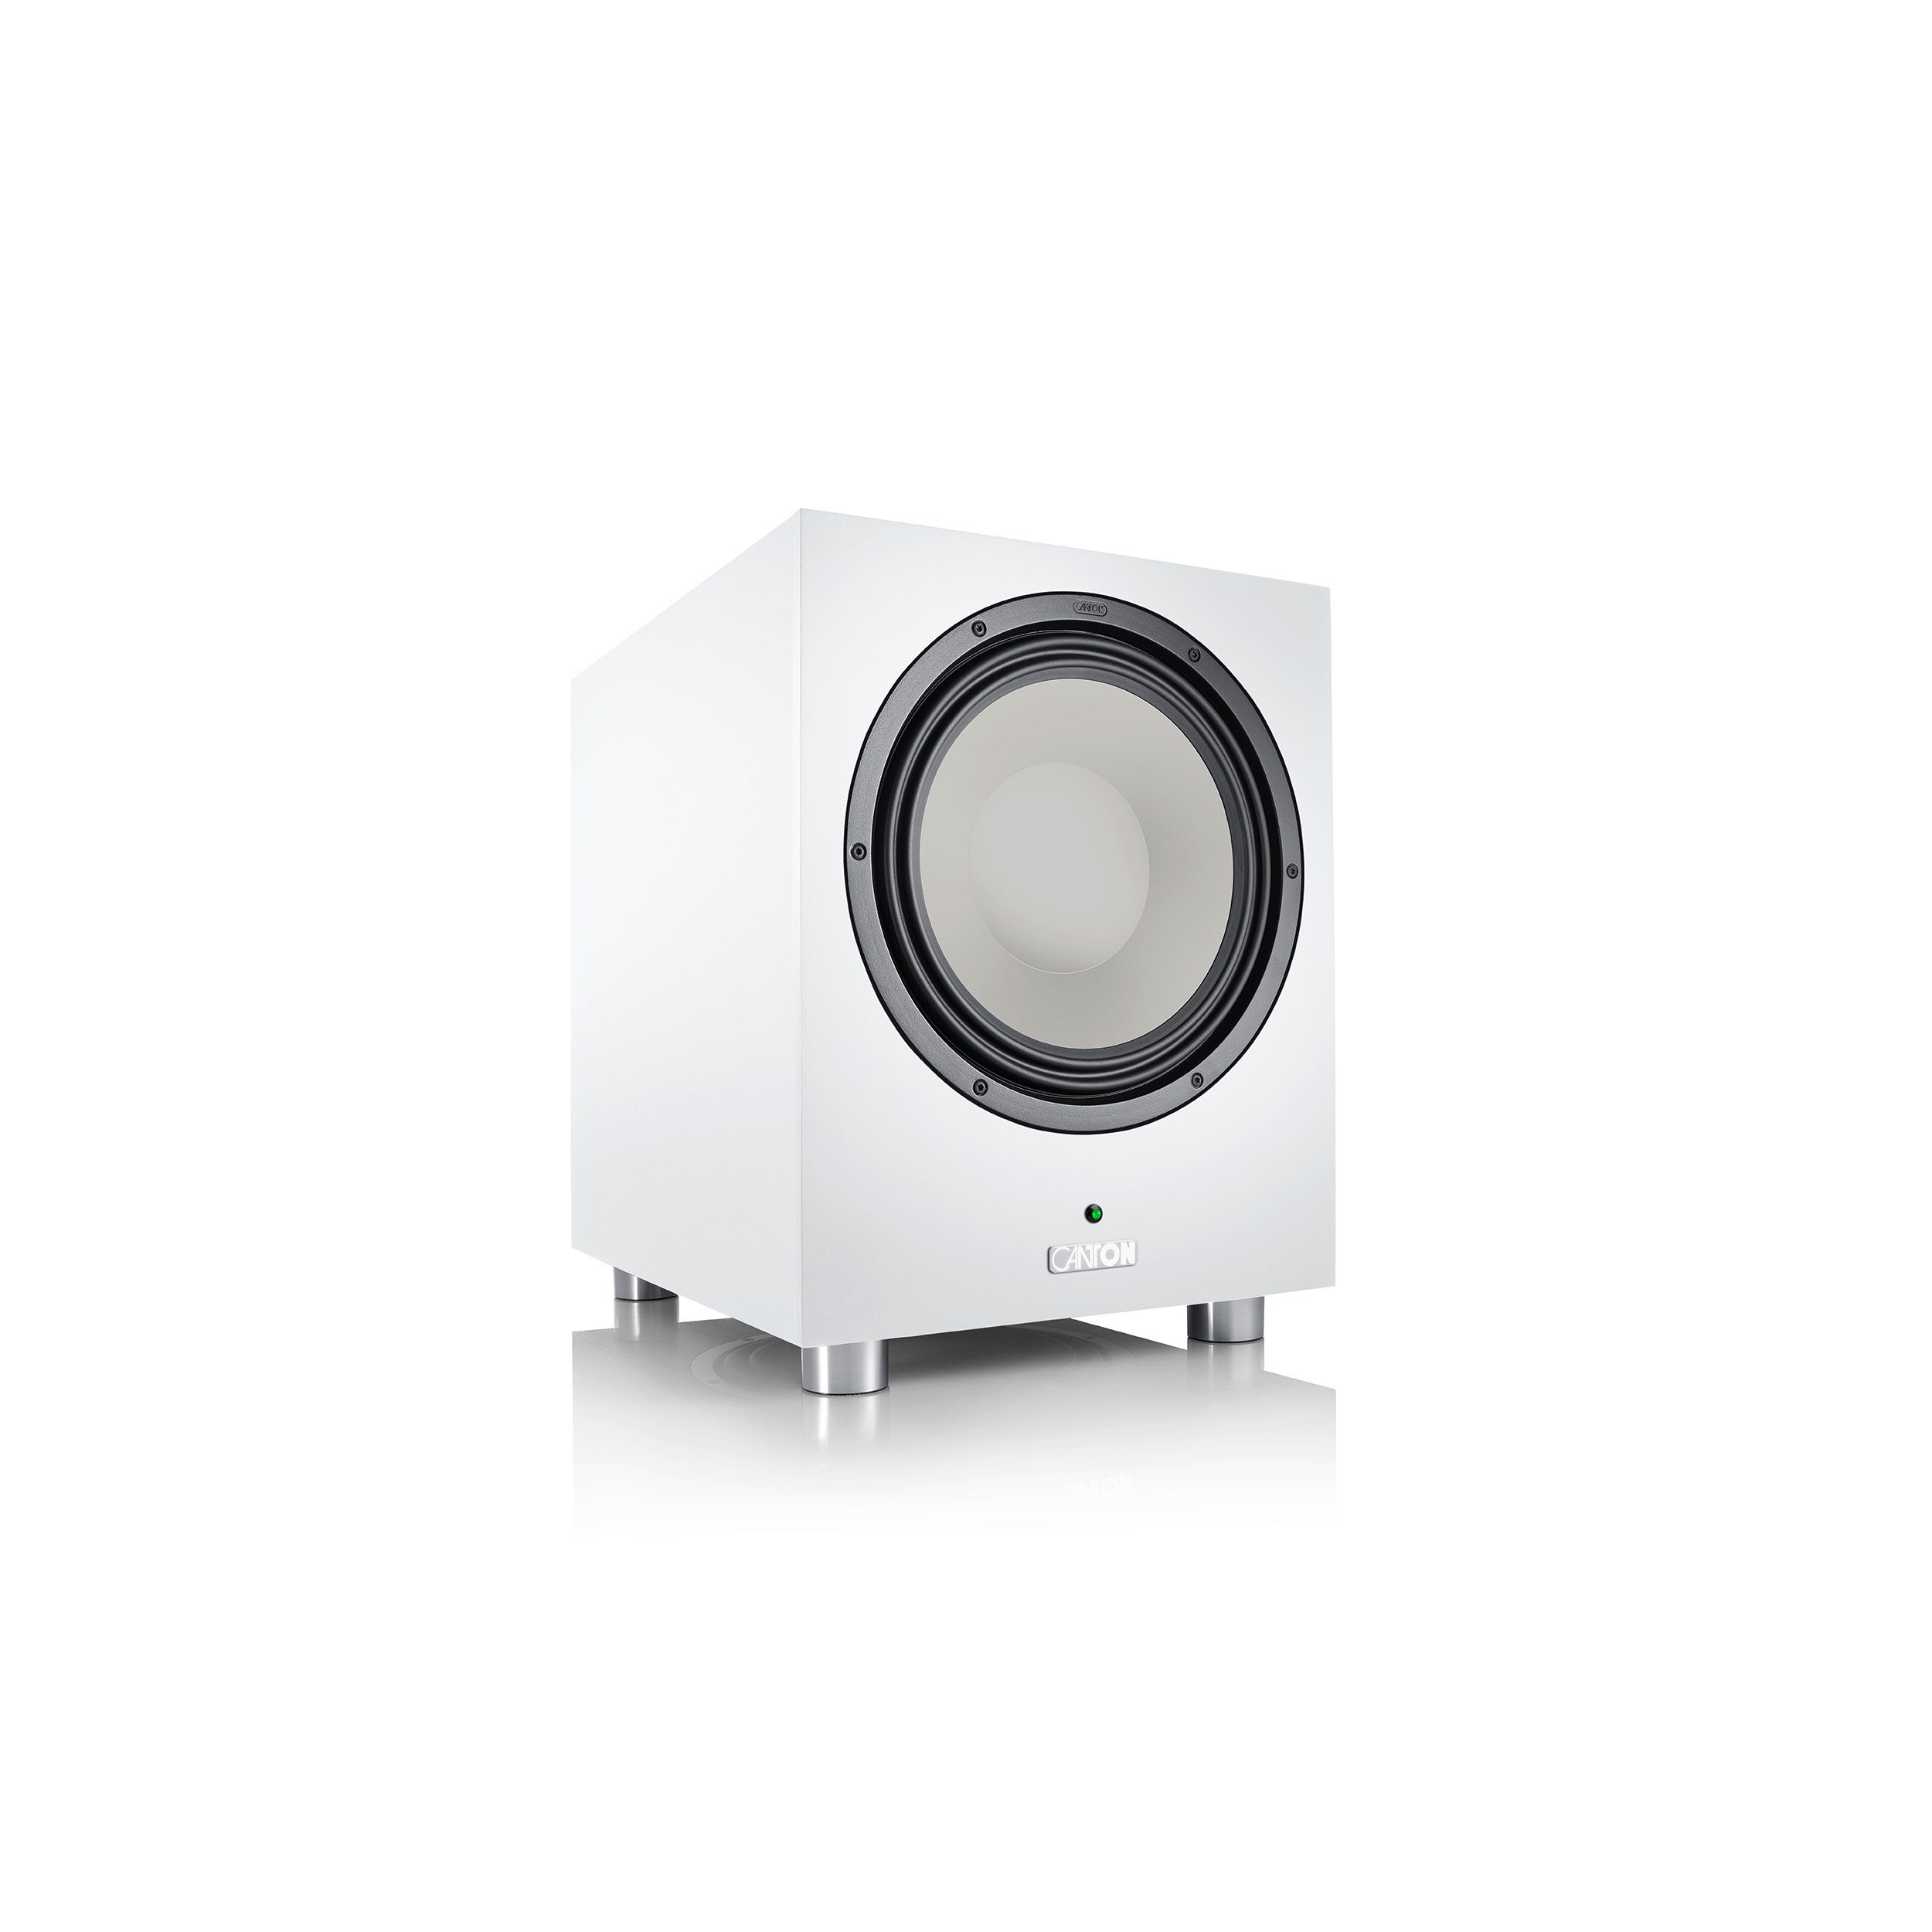 CANTON Power 10 Sub Subwoofer weiss